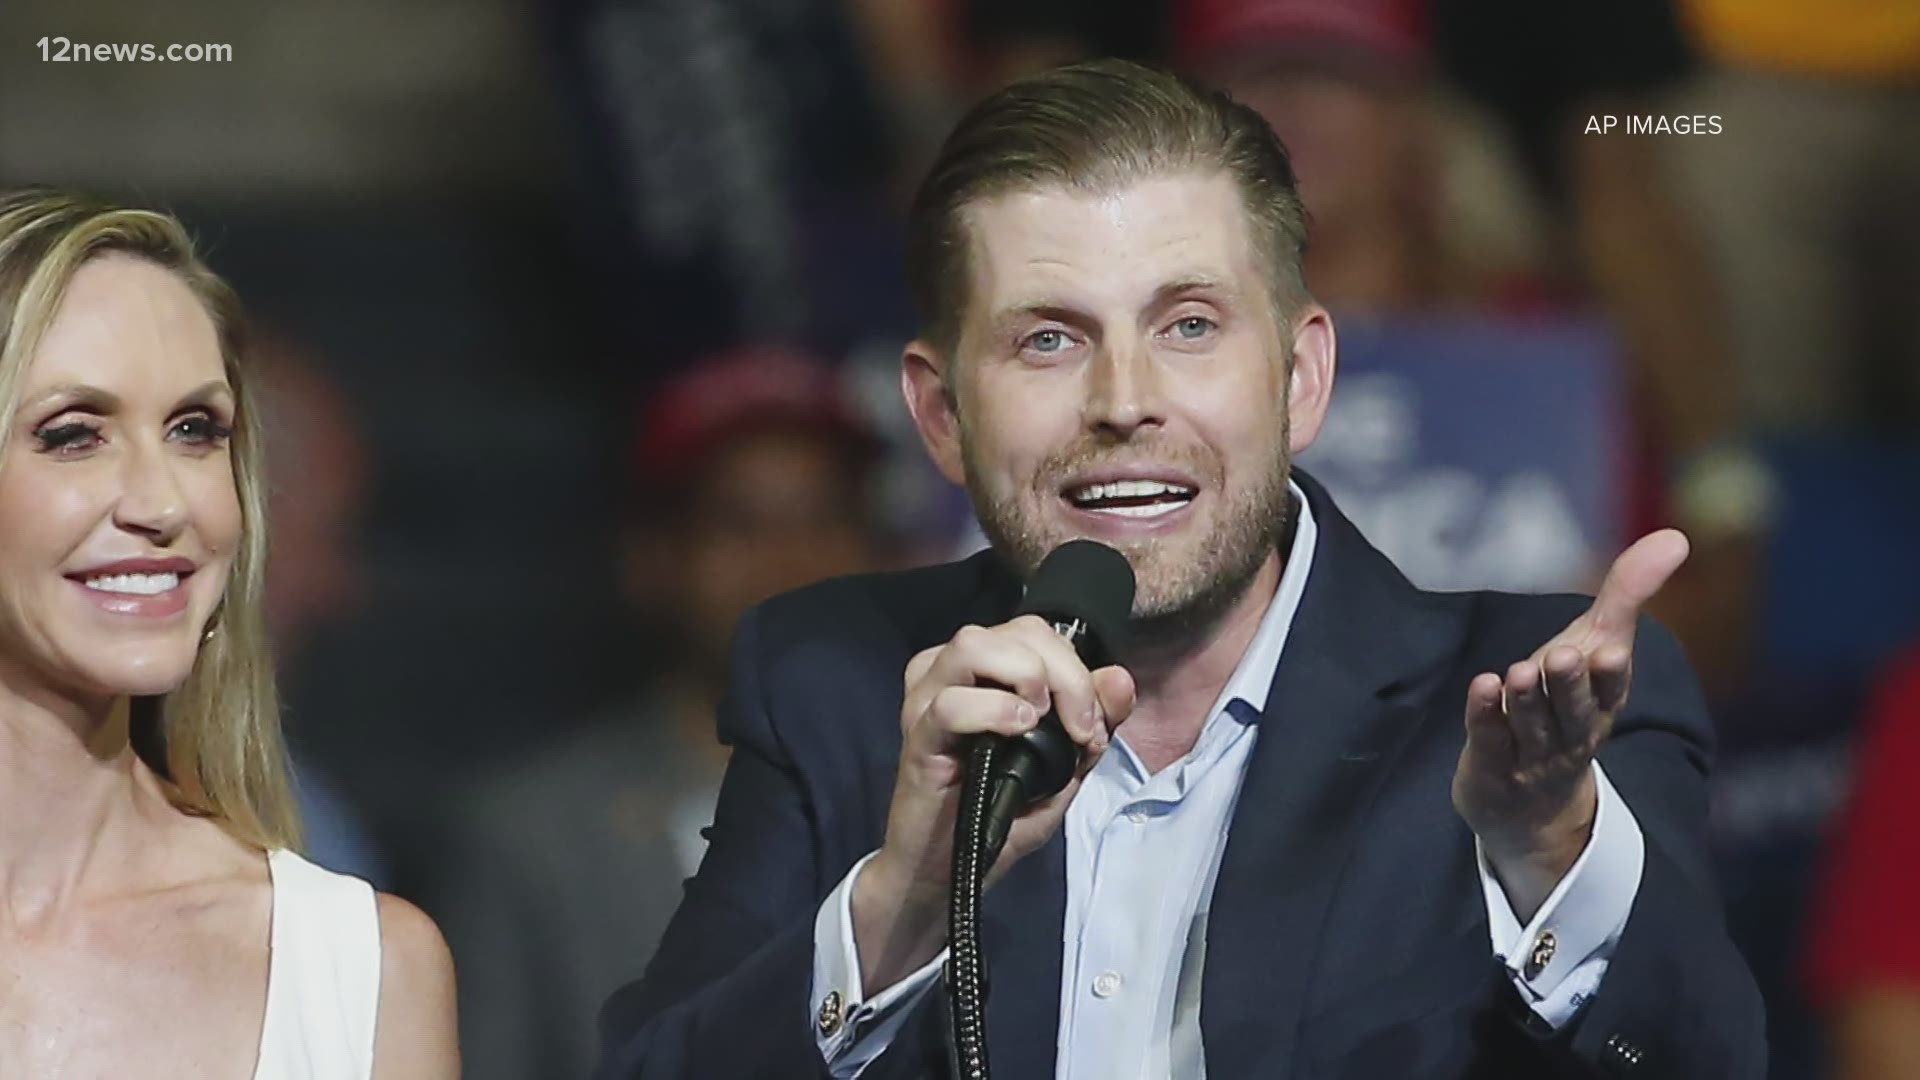 Eric Trump will be the latest member of the Trump campaign to visit the Valley on Wednesday. Team 12's Trisha Hendricks has the latest.